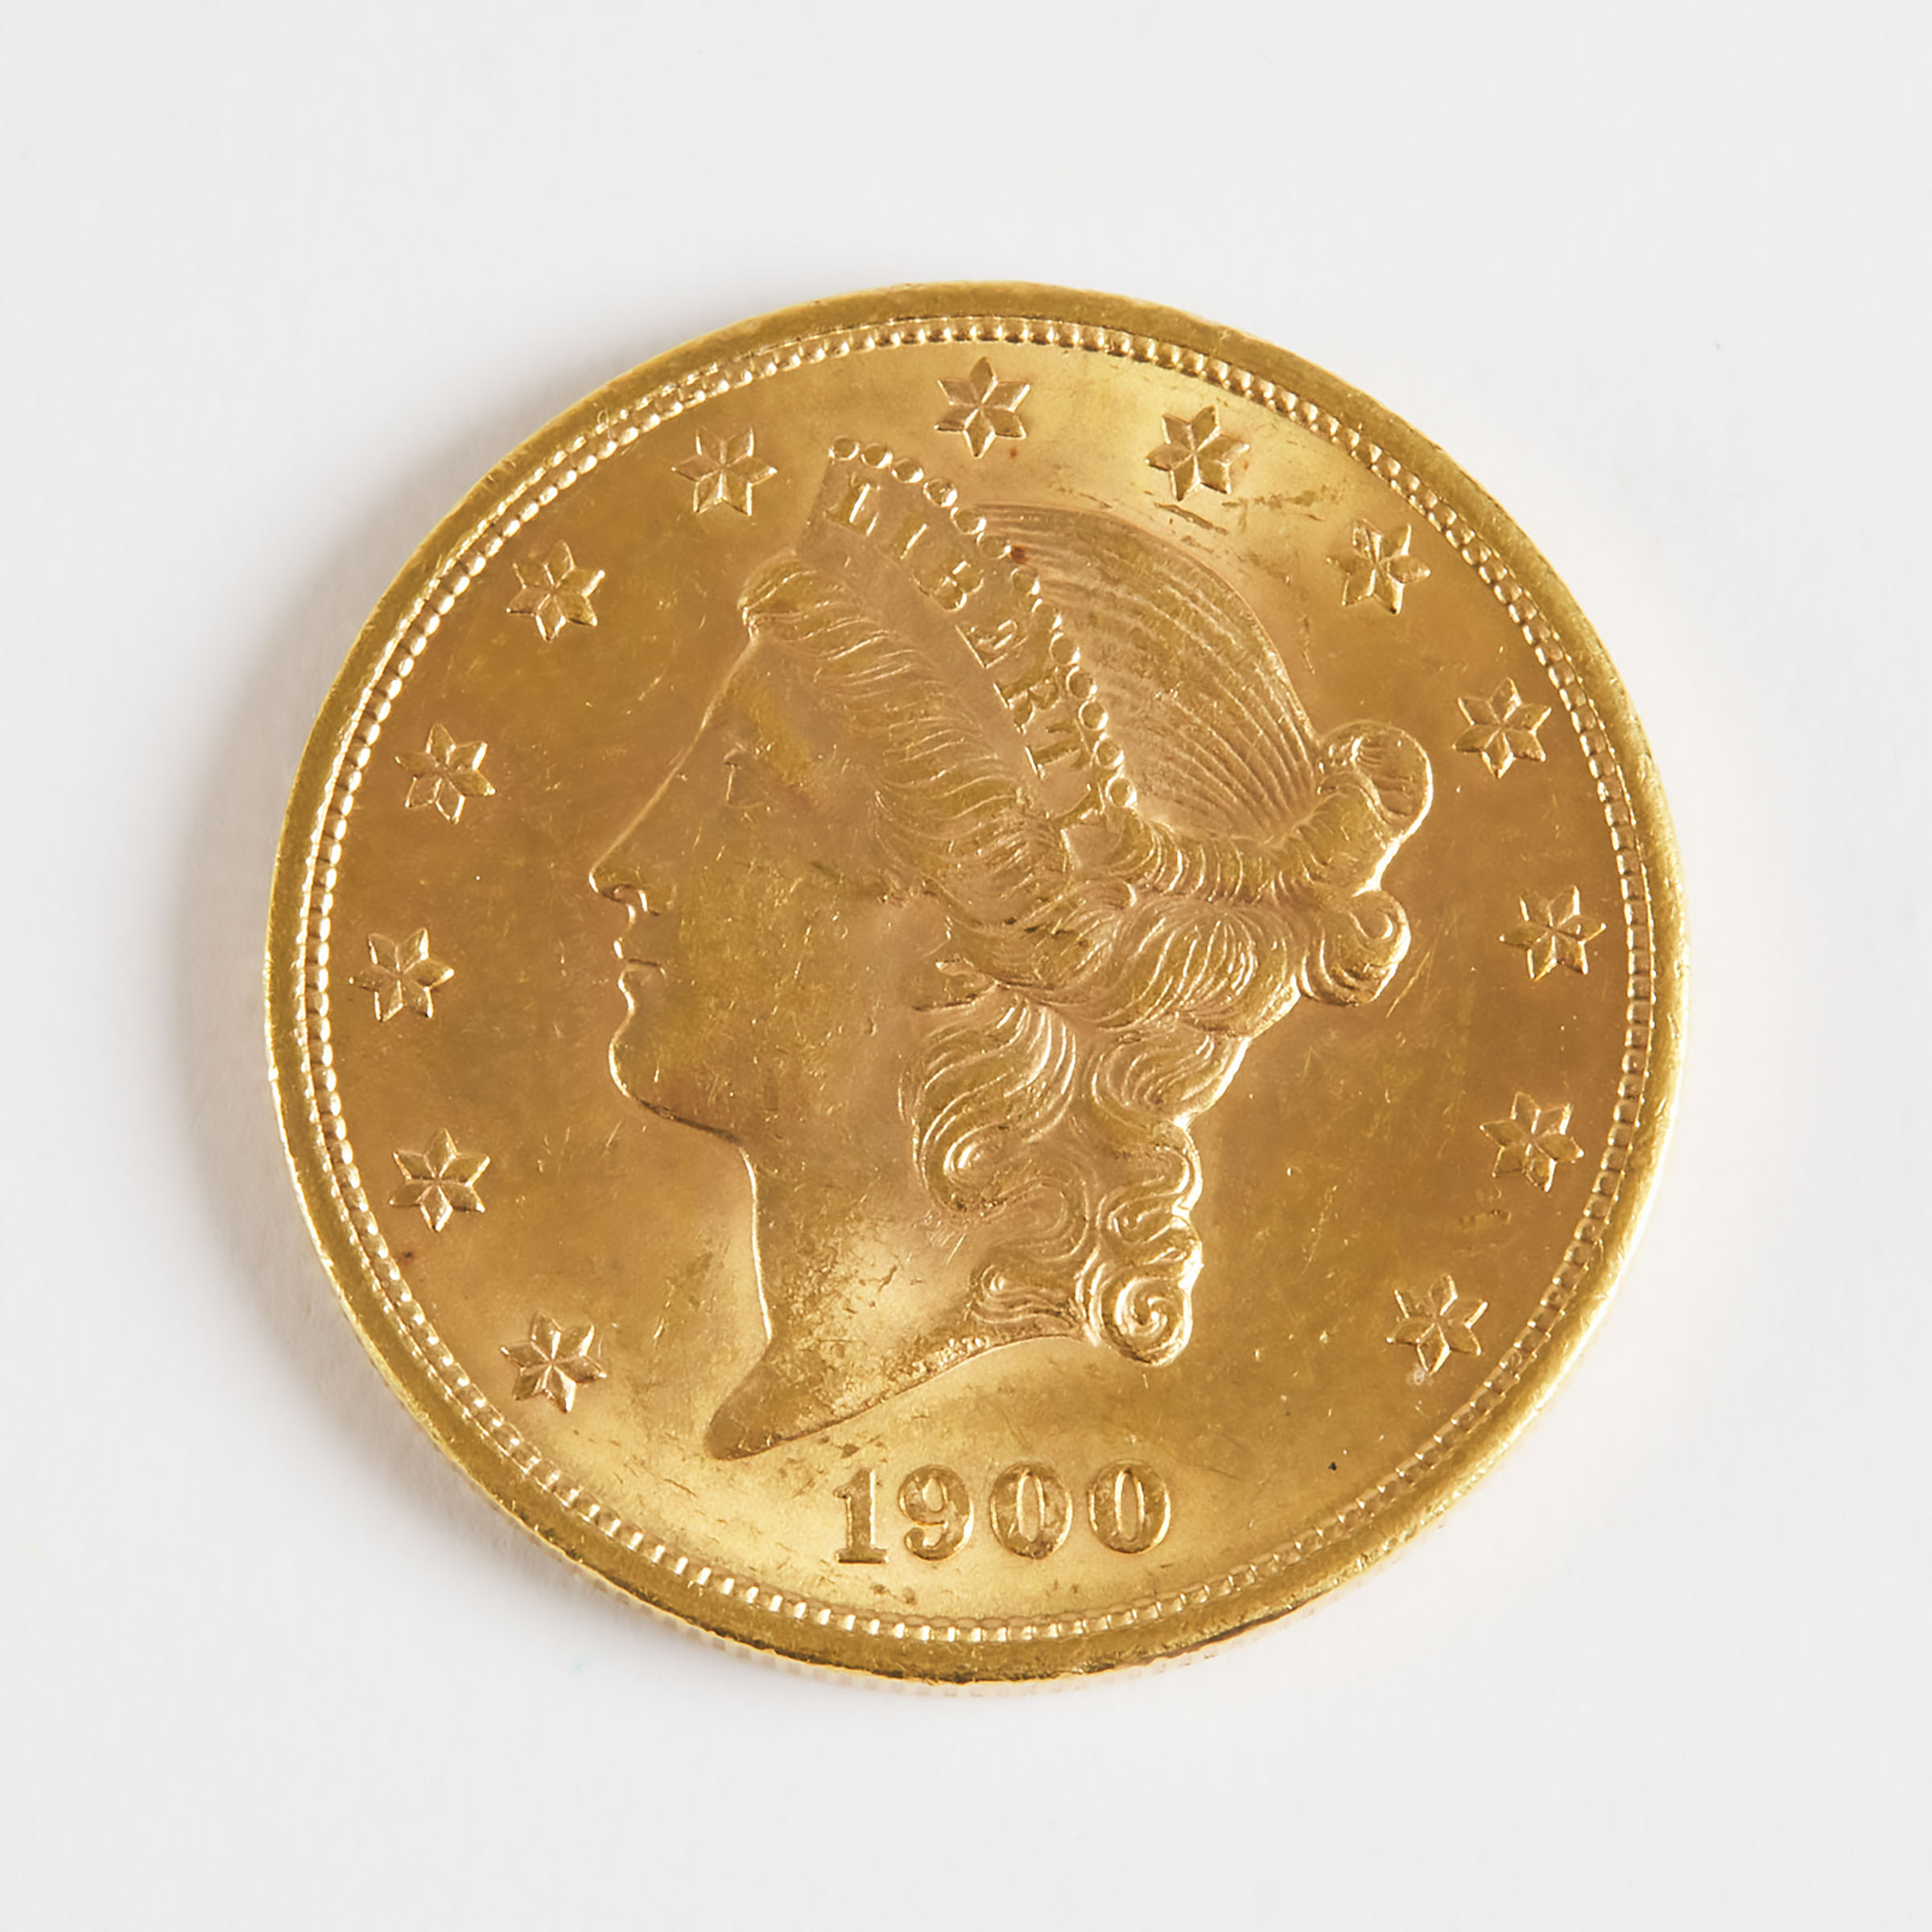 American 1900 $20 Double Eagle Gold Coin